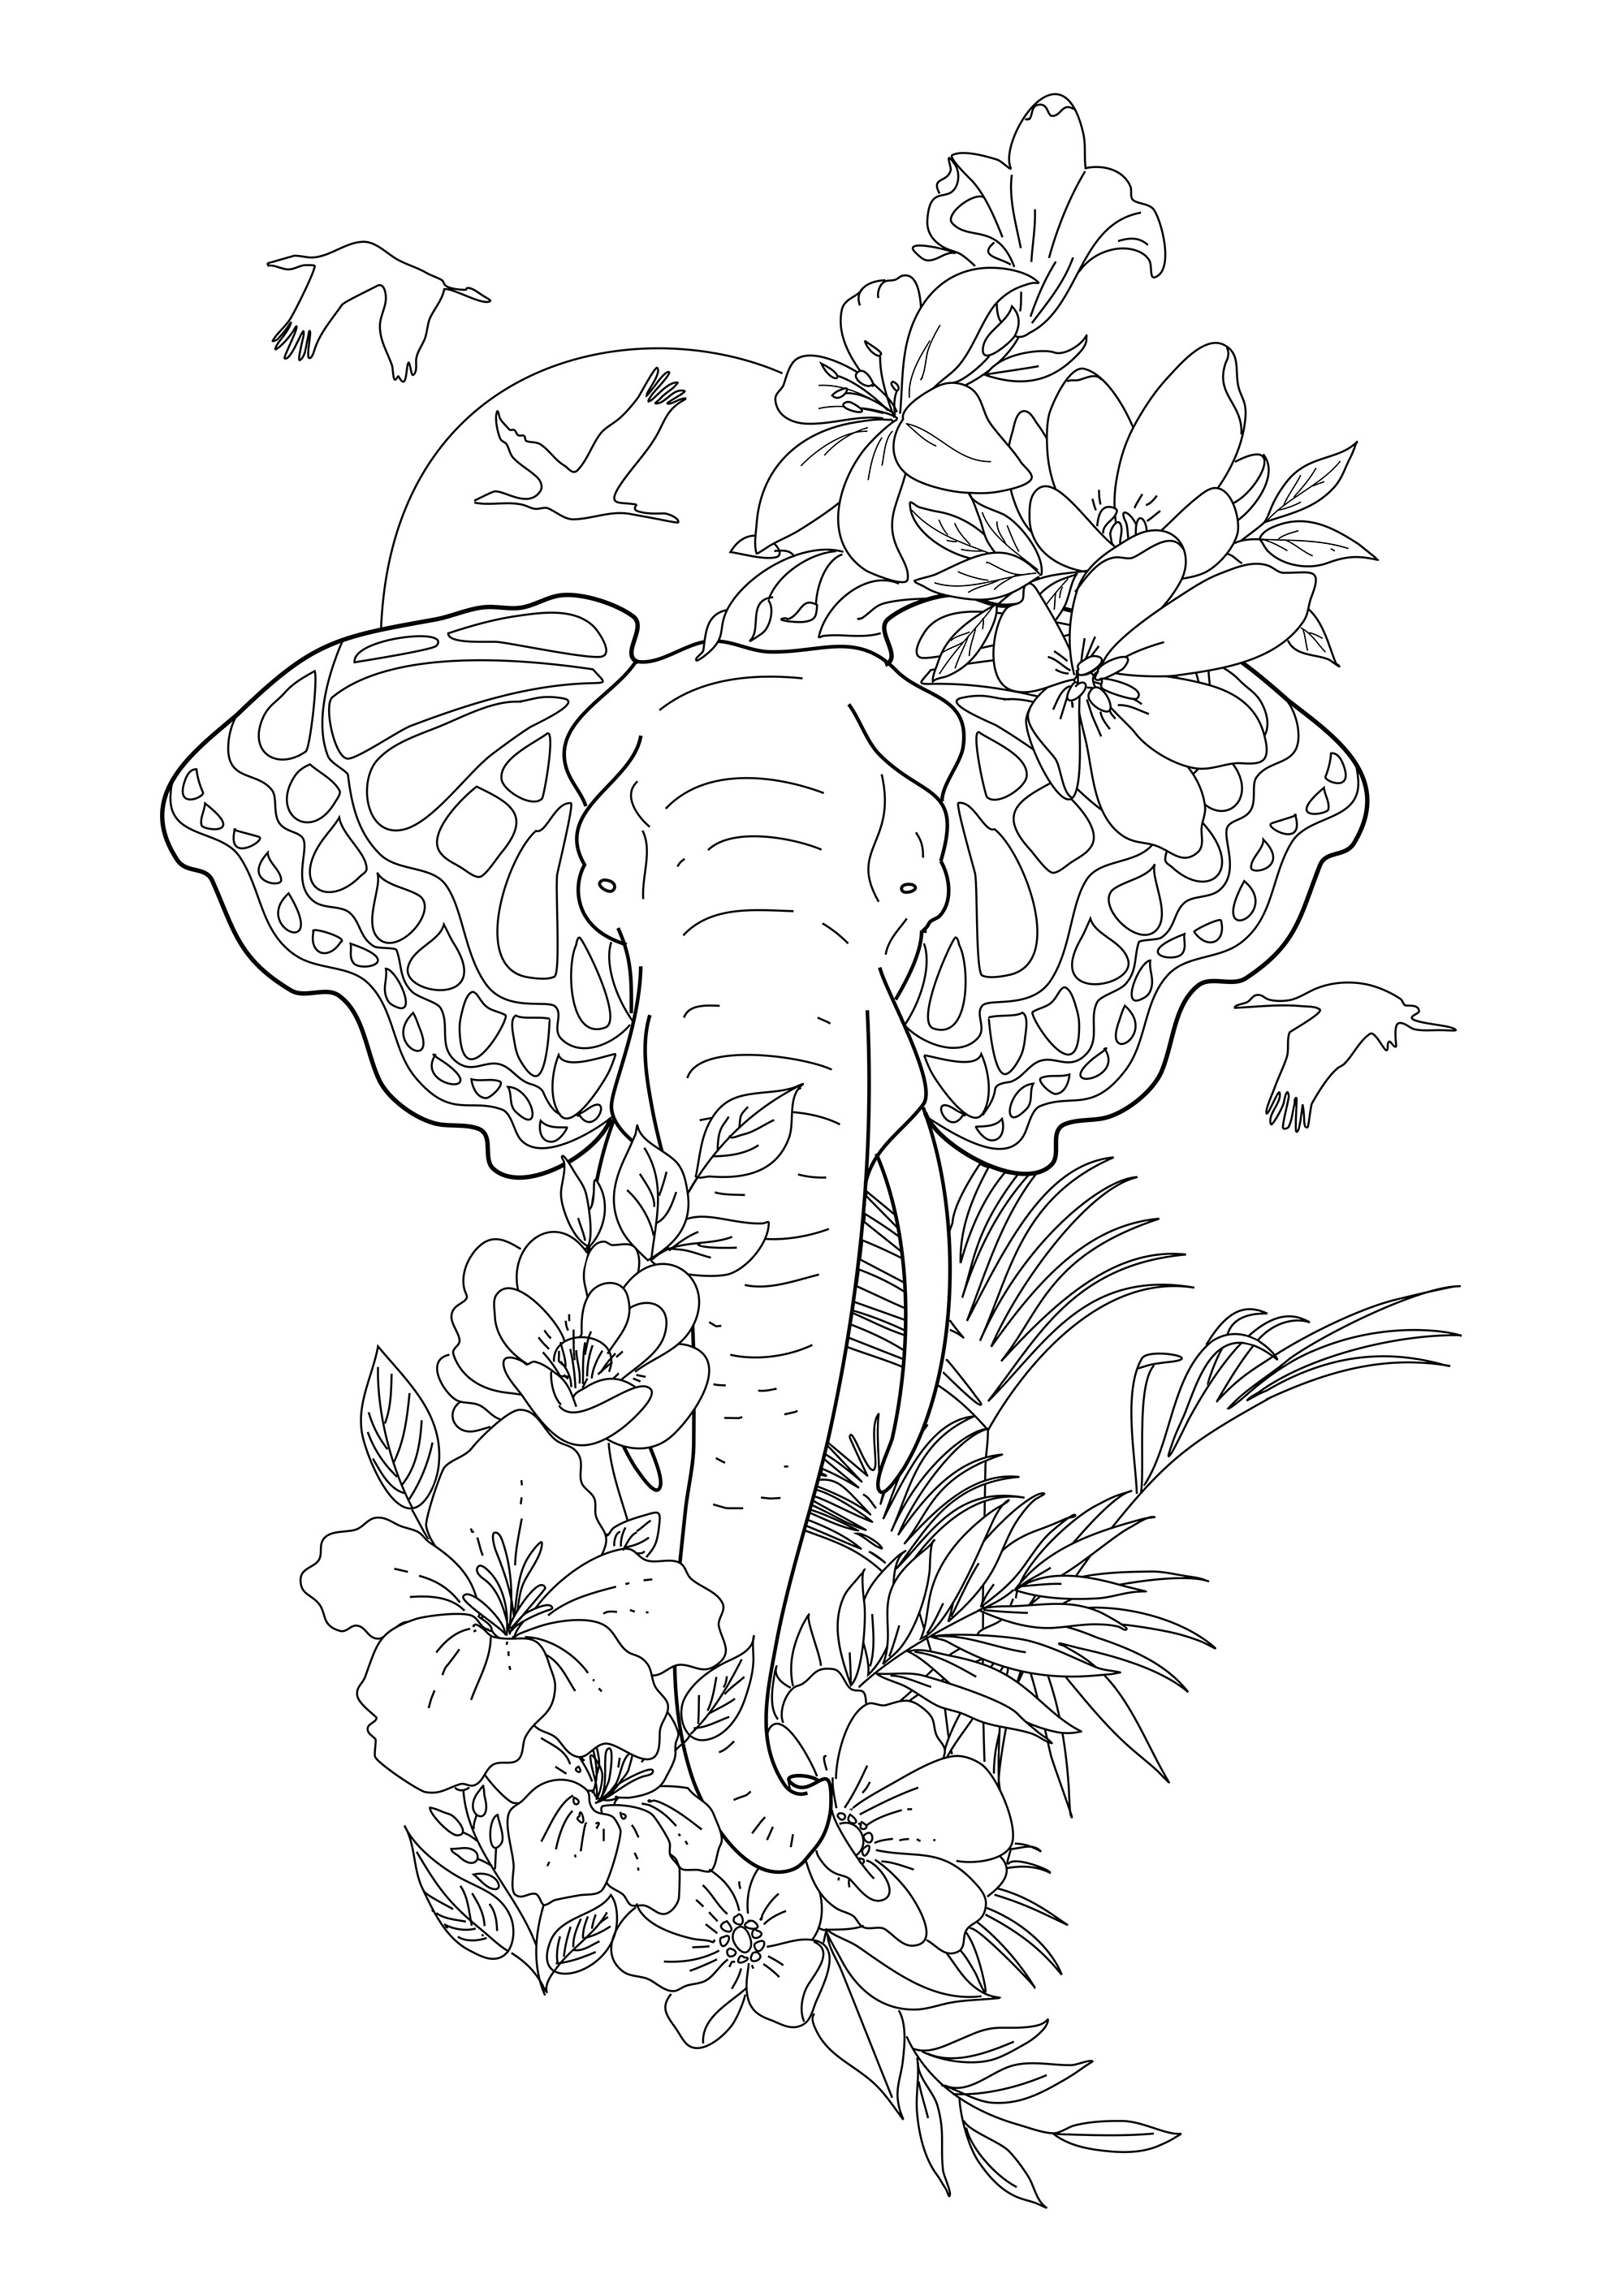 Elephant, flowers and birds. The ears of the pachyderm represent butterfly wings!. Excerpt from 'Realistic Tattoos Coloring Book' by Roberto 'GiErre' Gemori  More information: coloringbook.pictures/index.html  Author's website: Tattootribes.com